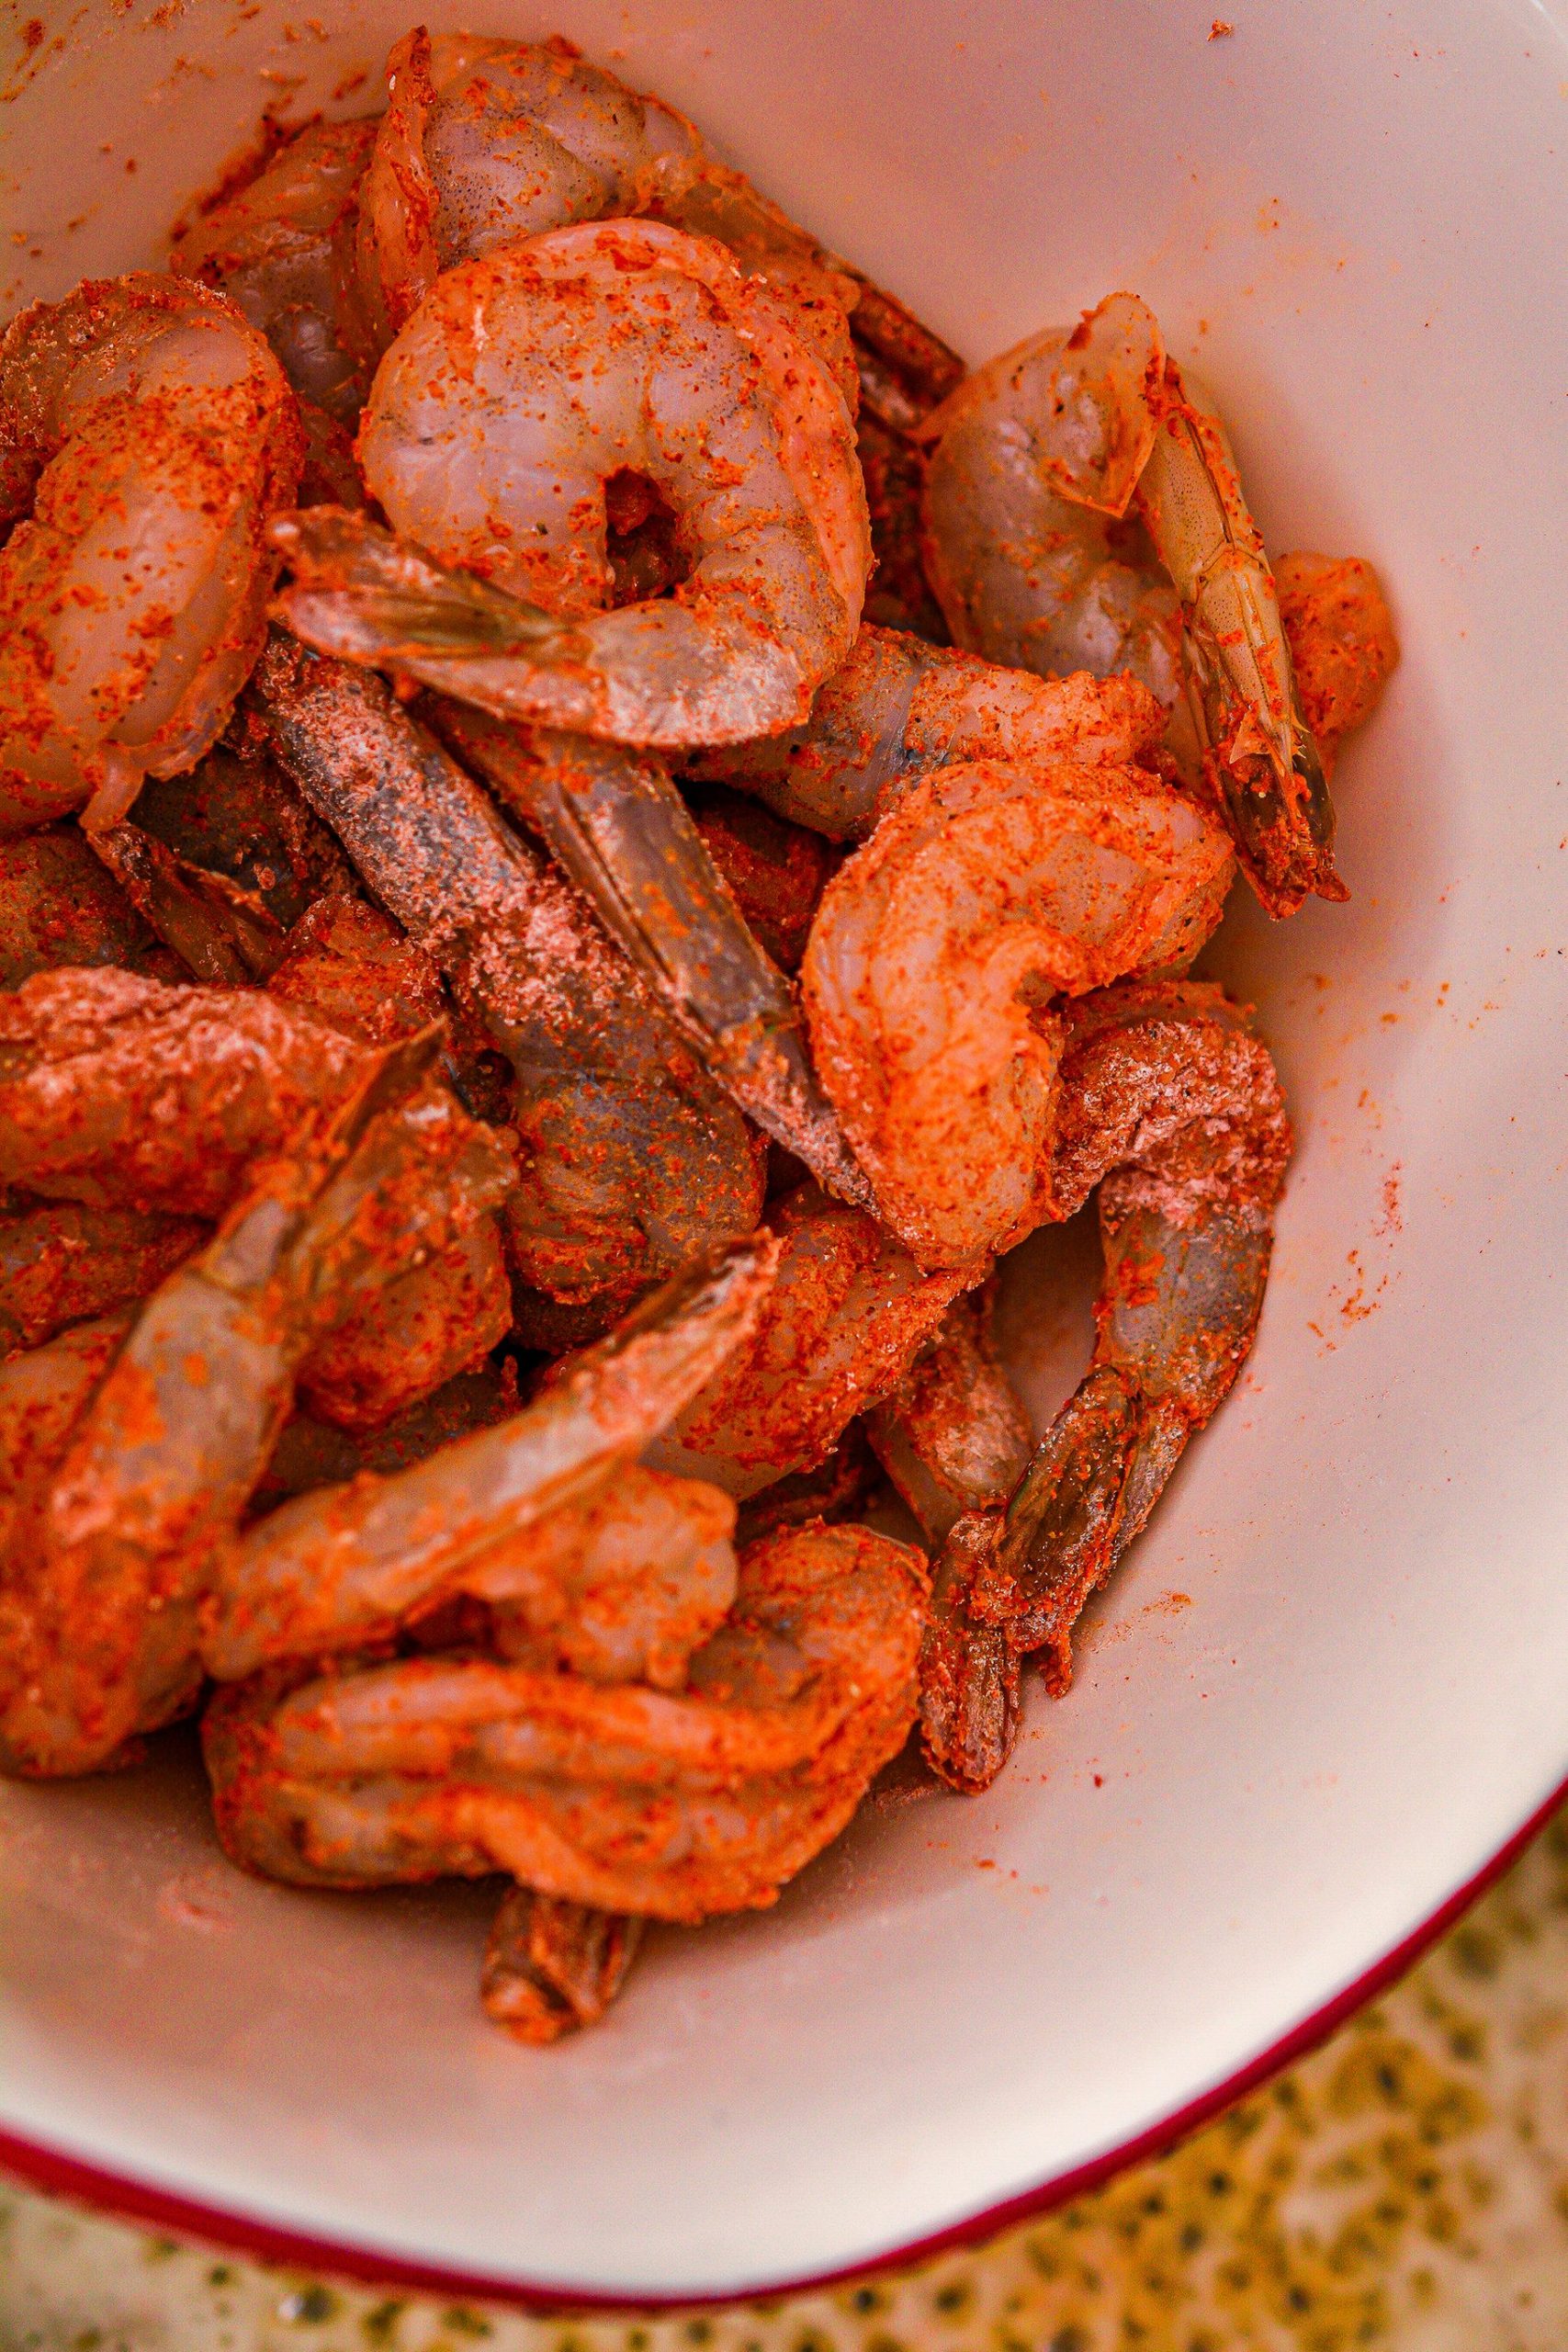 Add the shrimp to the skillet, and saute for several minutes on each side until browned and cooked through.